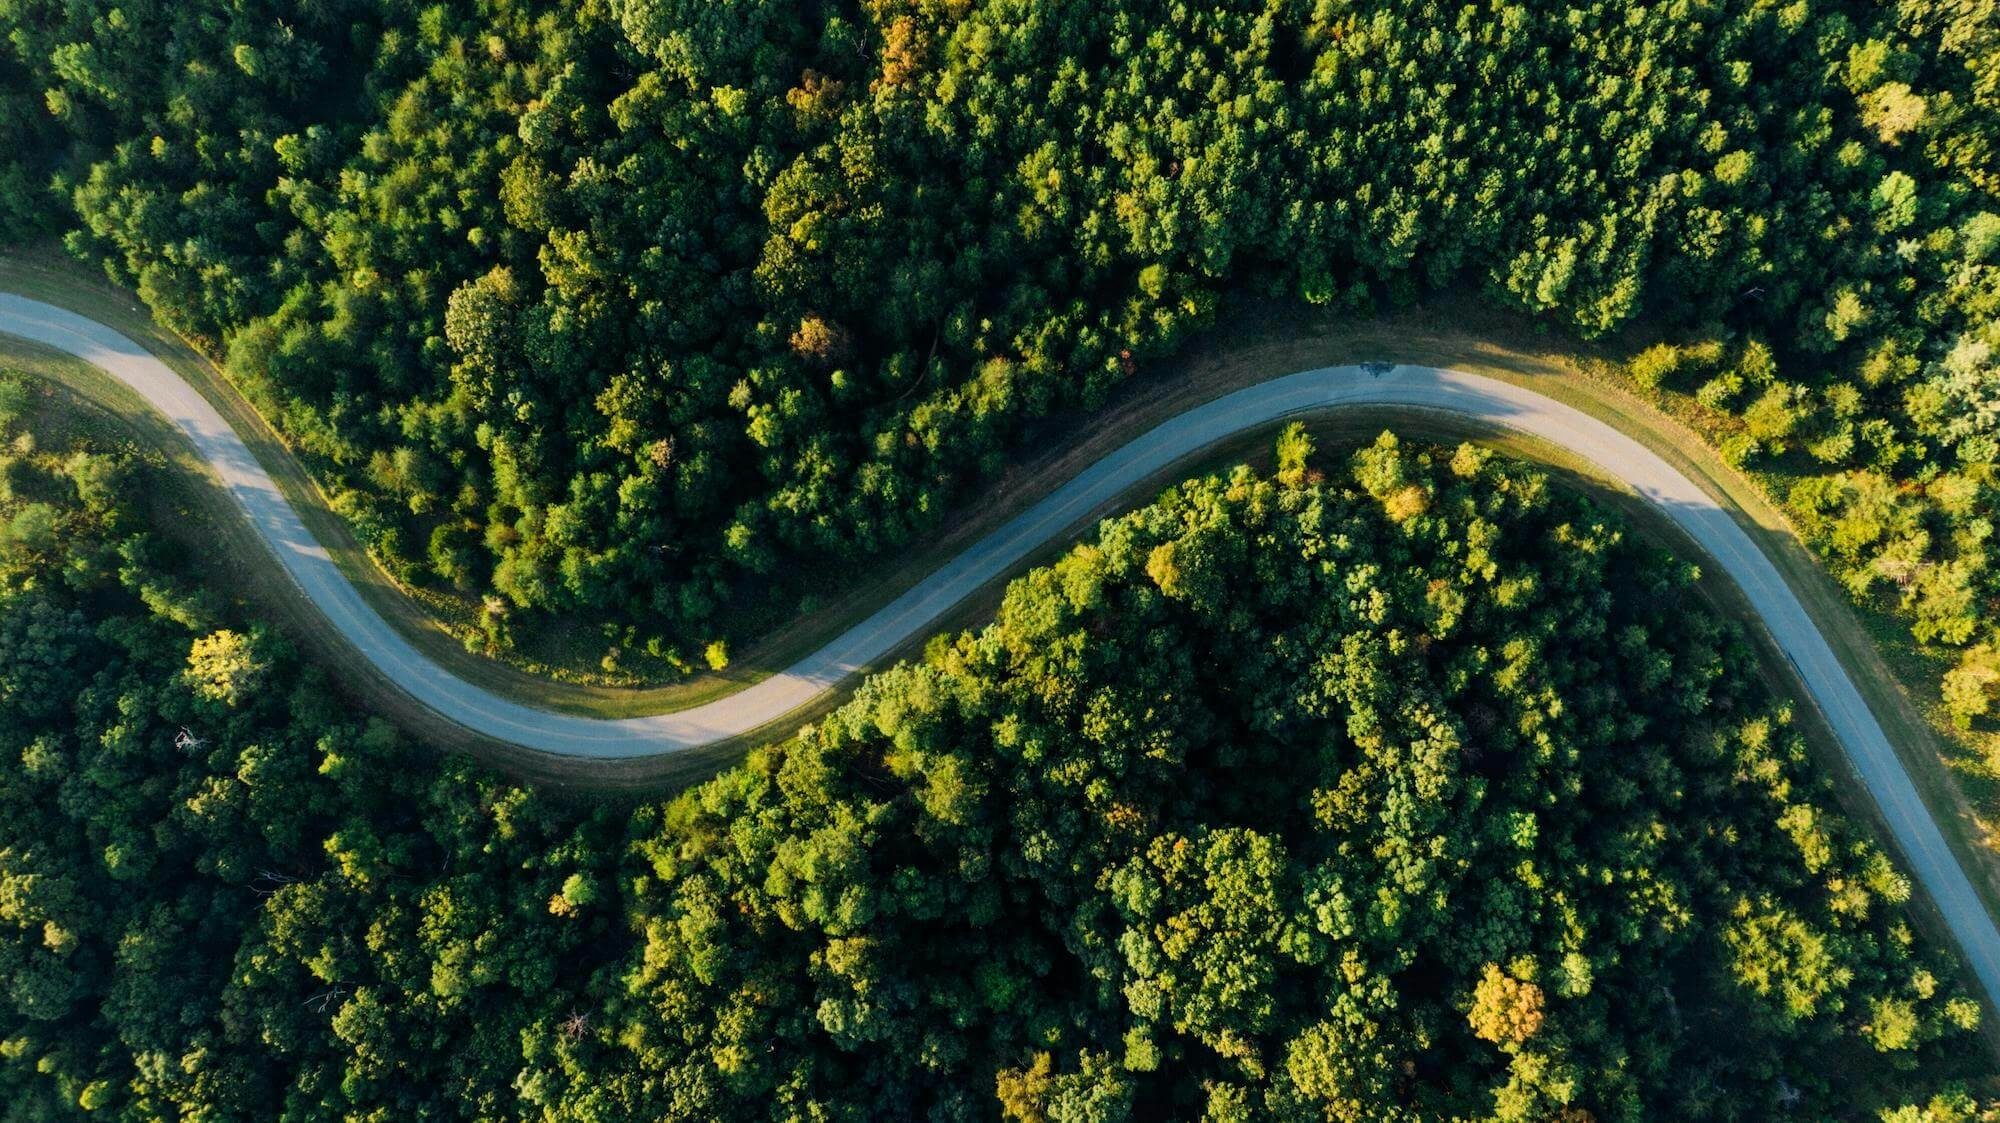 birds eye view of a road through a forest